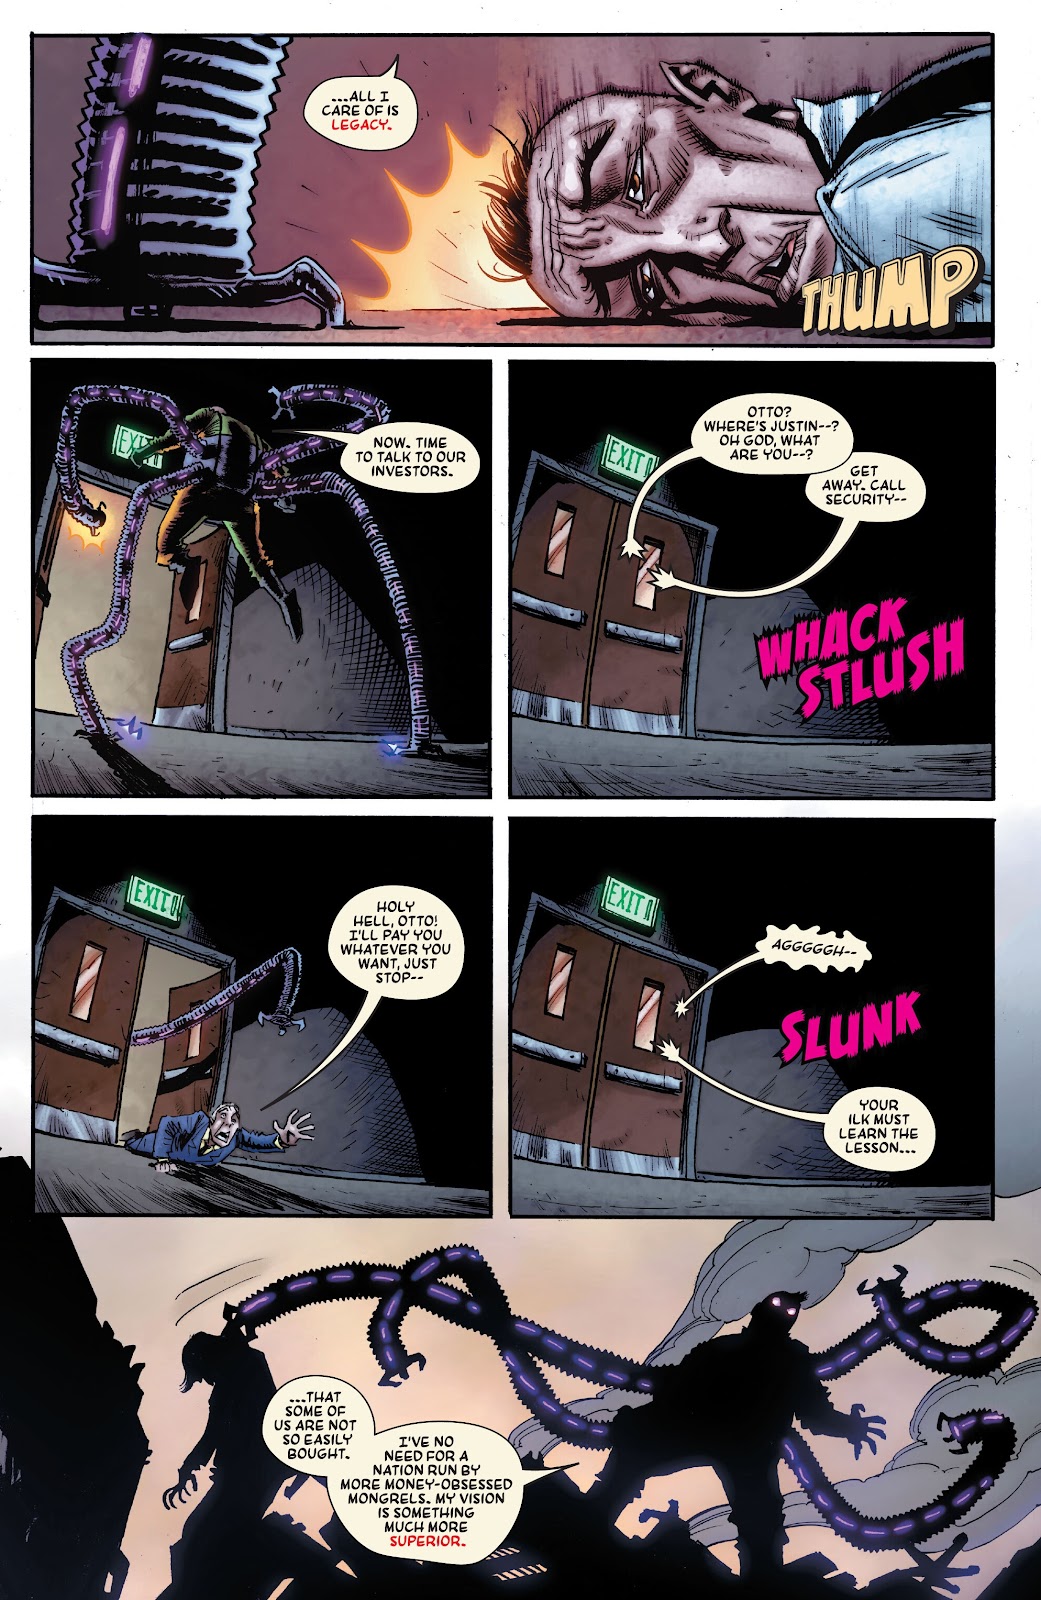 Spider-Punk: Arms Race issue 2 - Page 12